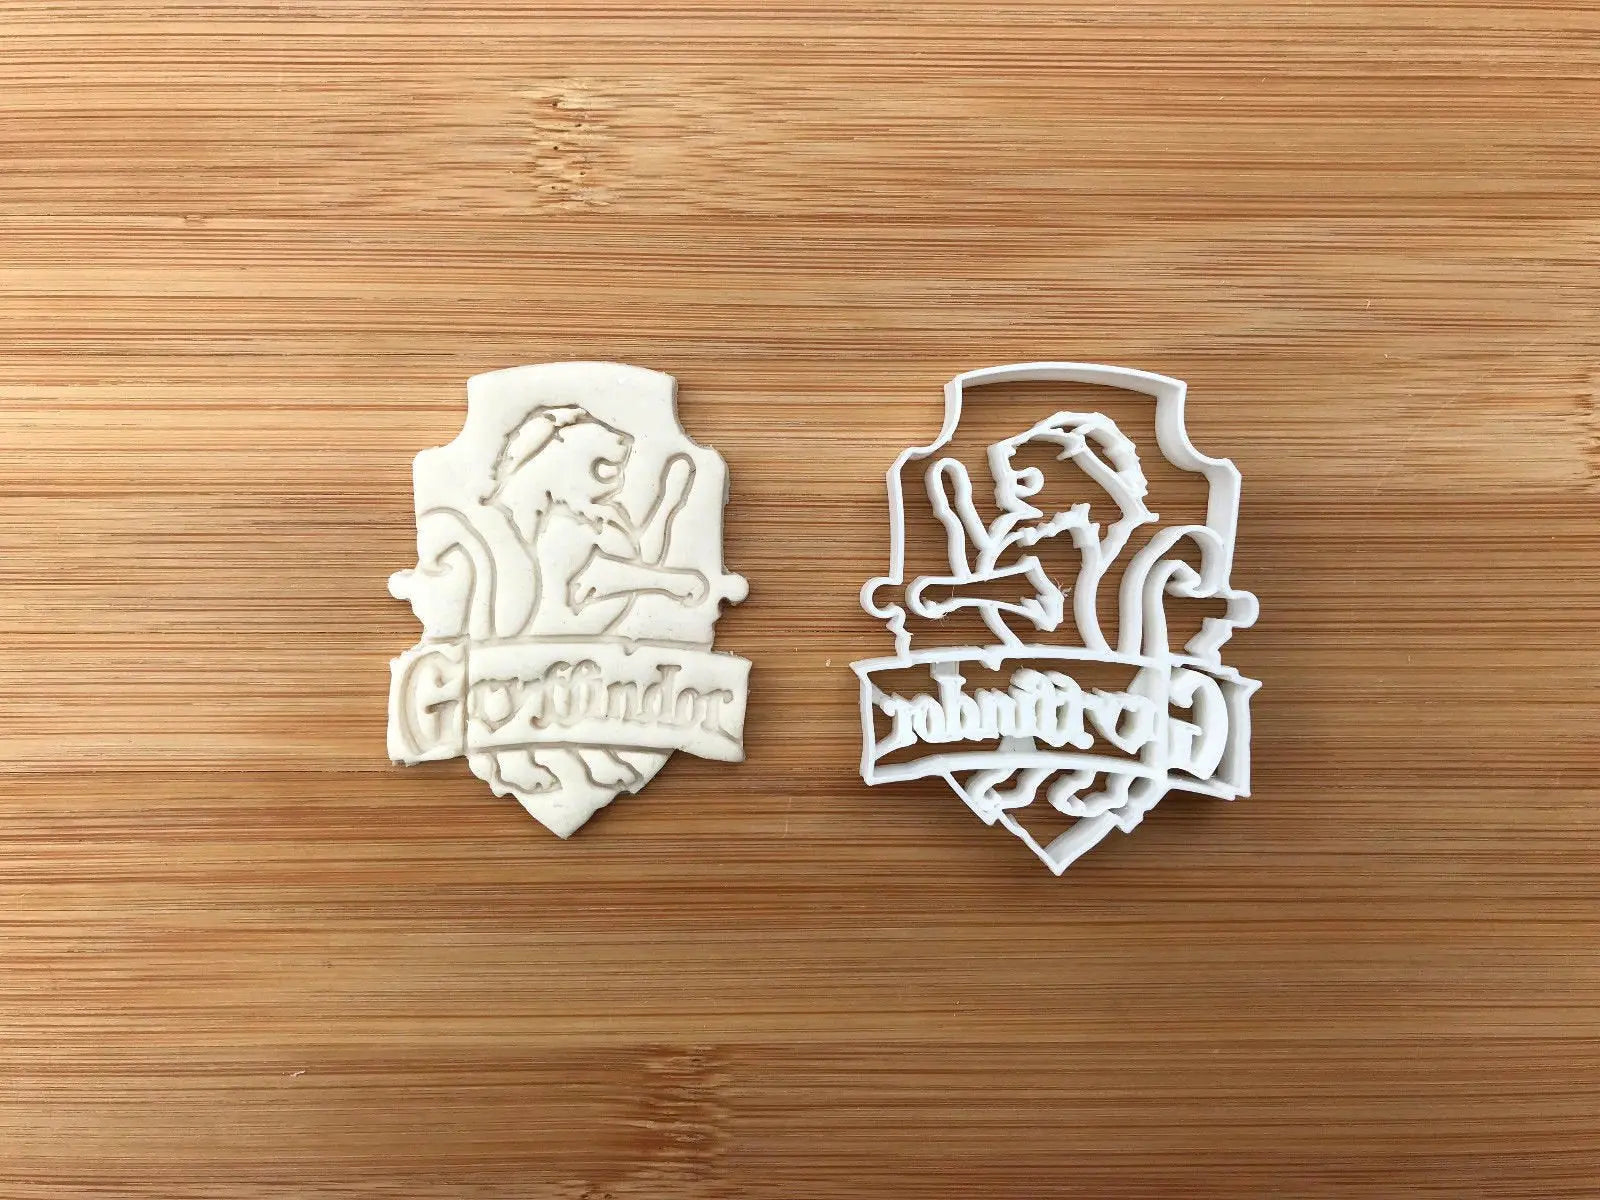 Gryffindor badge Harry Potter-inspired Cookie Cutter Fondant Cake Decorating MEG cookie cutters